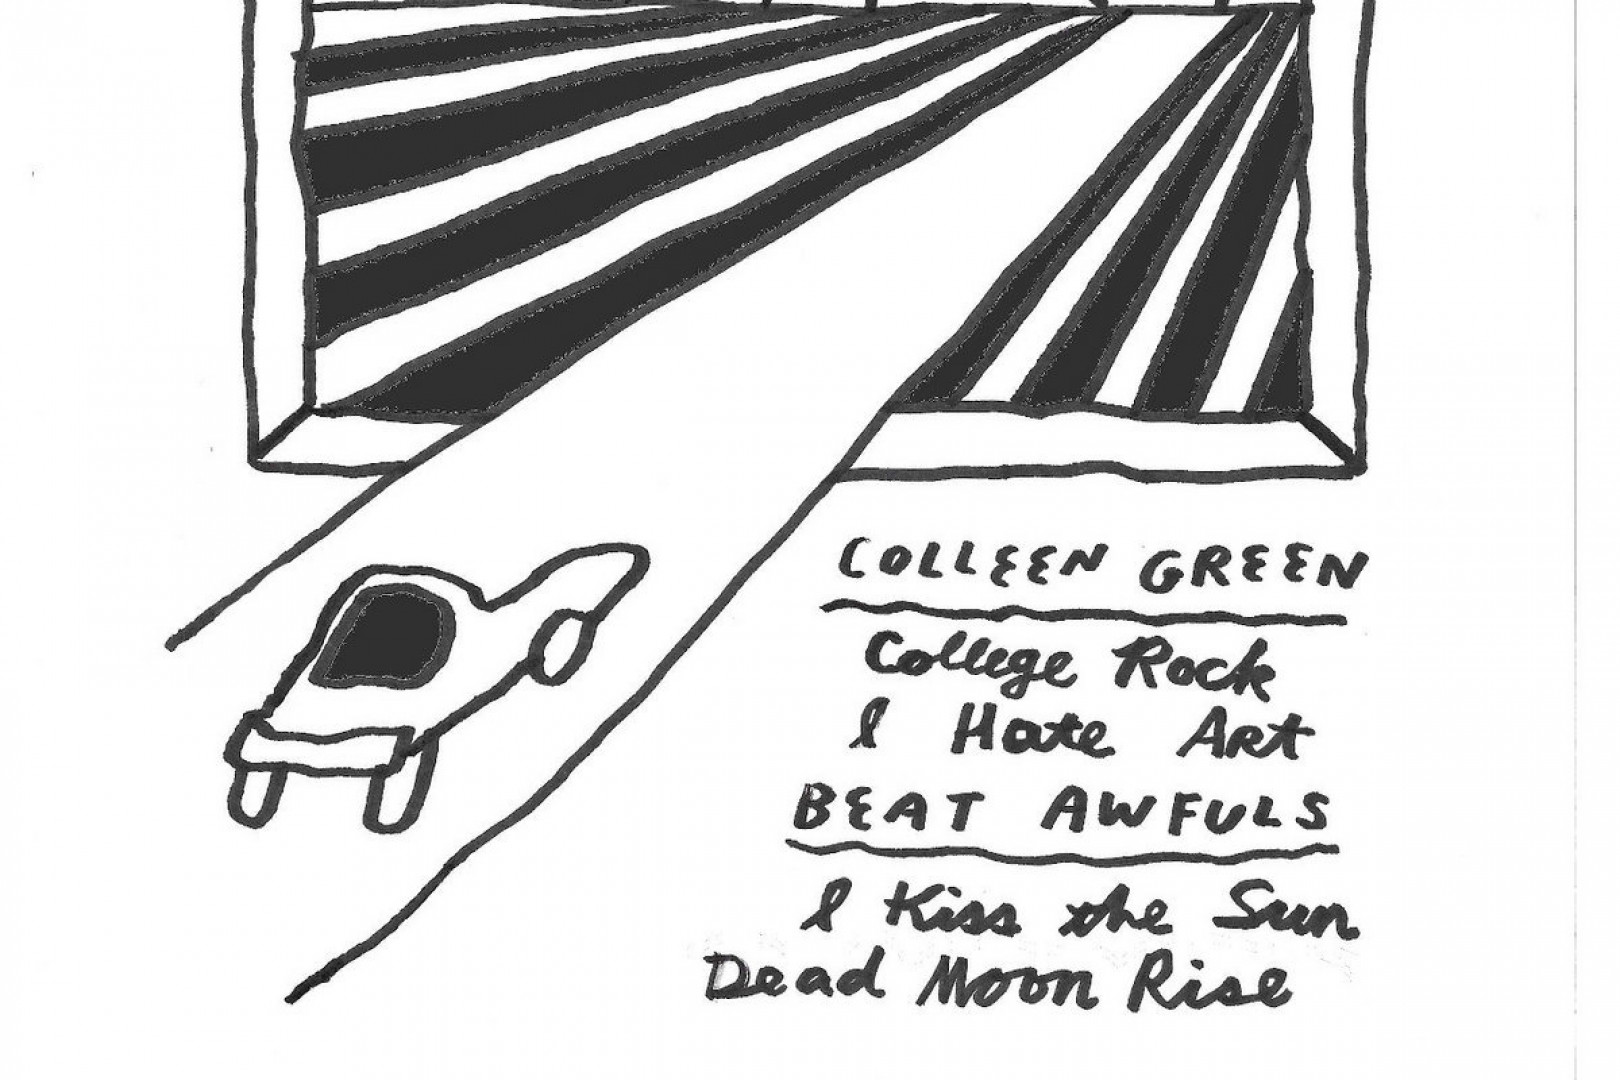 Colleen Green and Beat Awfuls release split EP